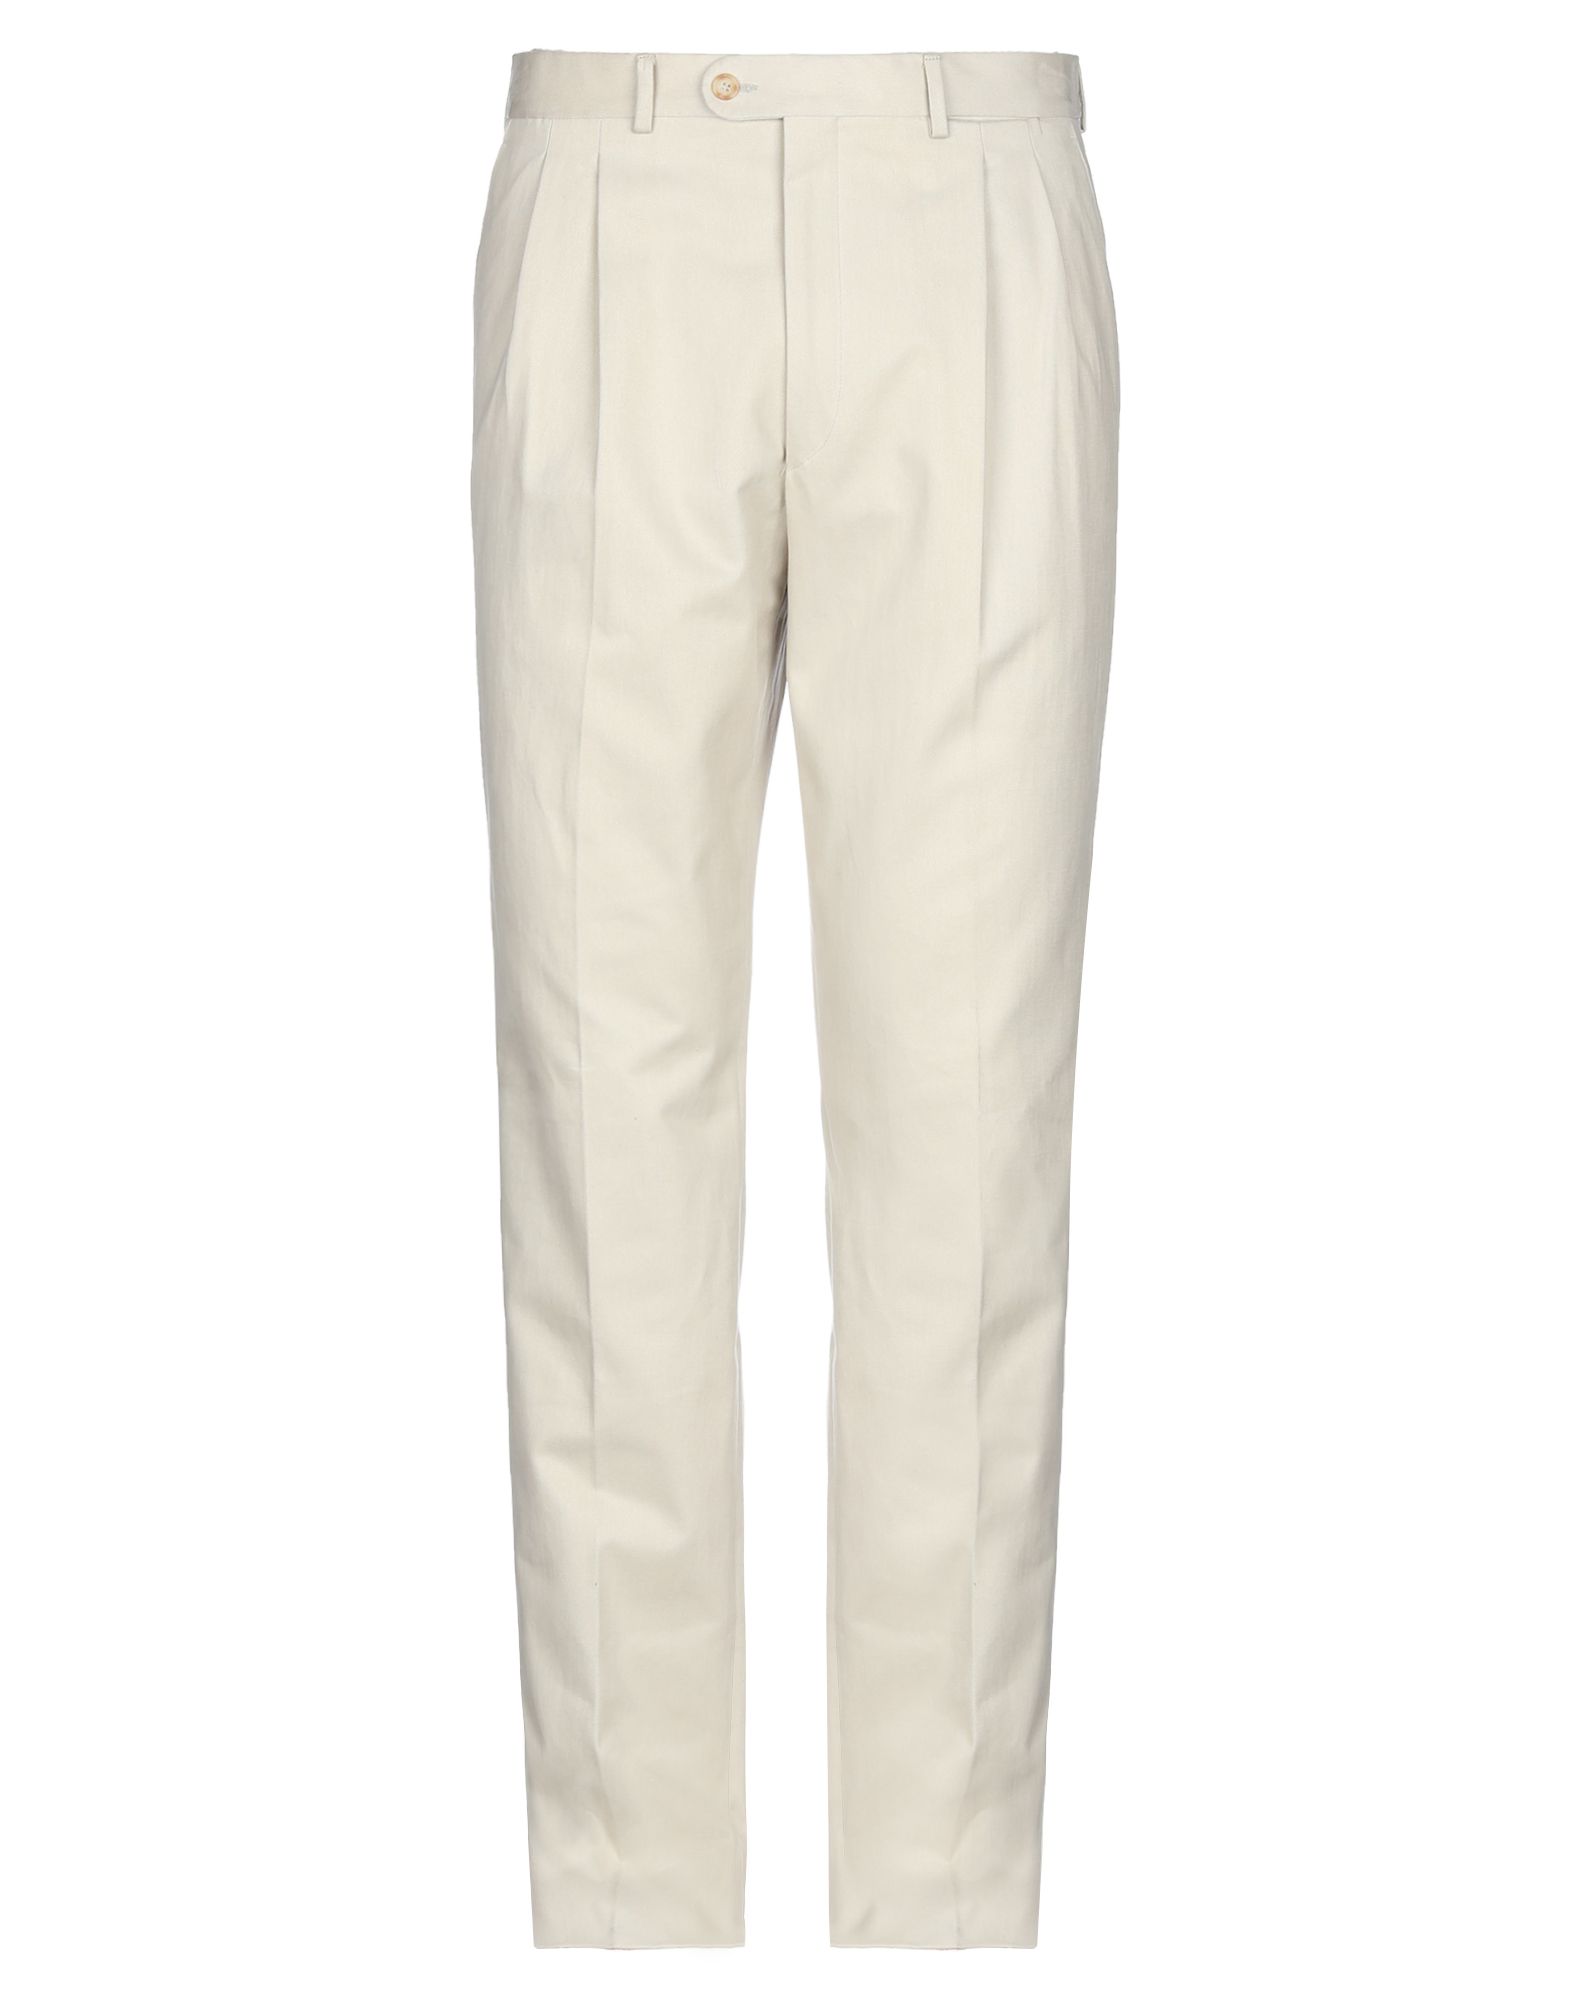 GERMANO GERMANO Casual pants from yoox.com | Daily Mail